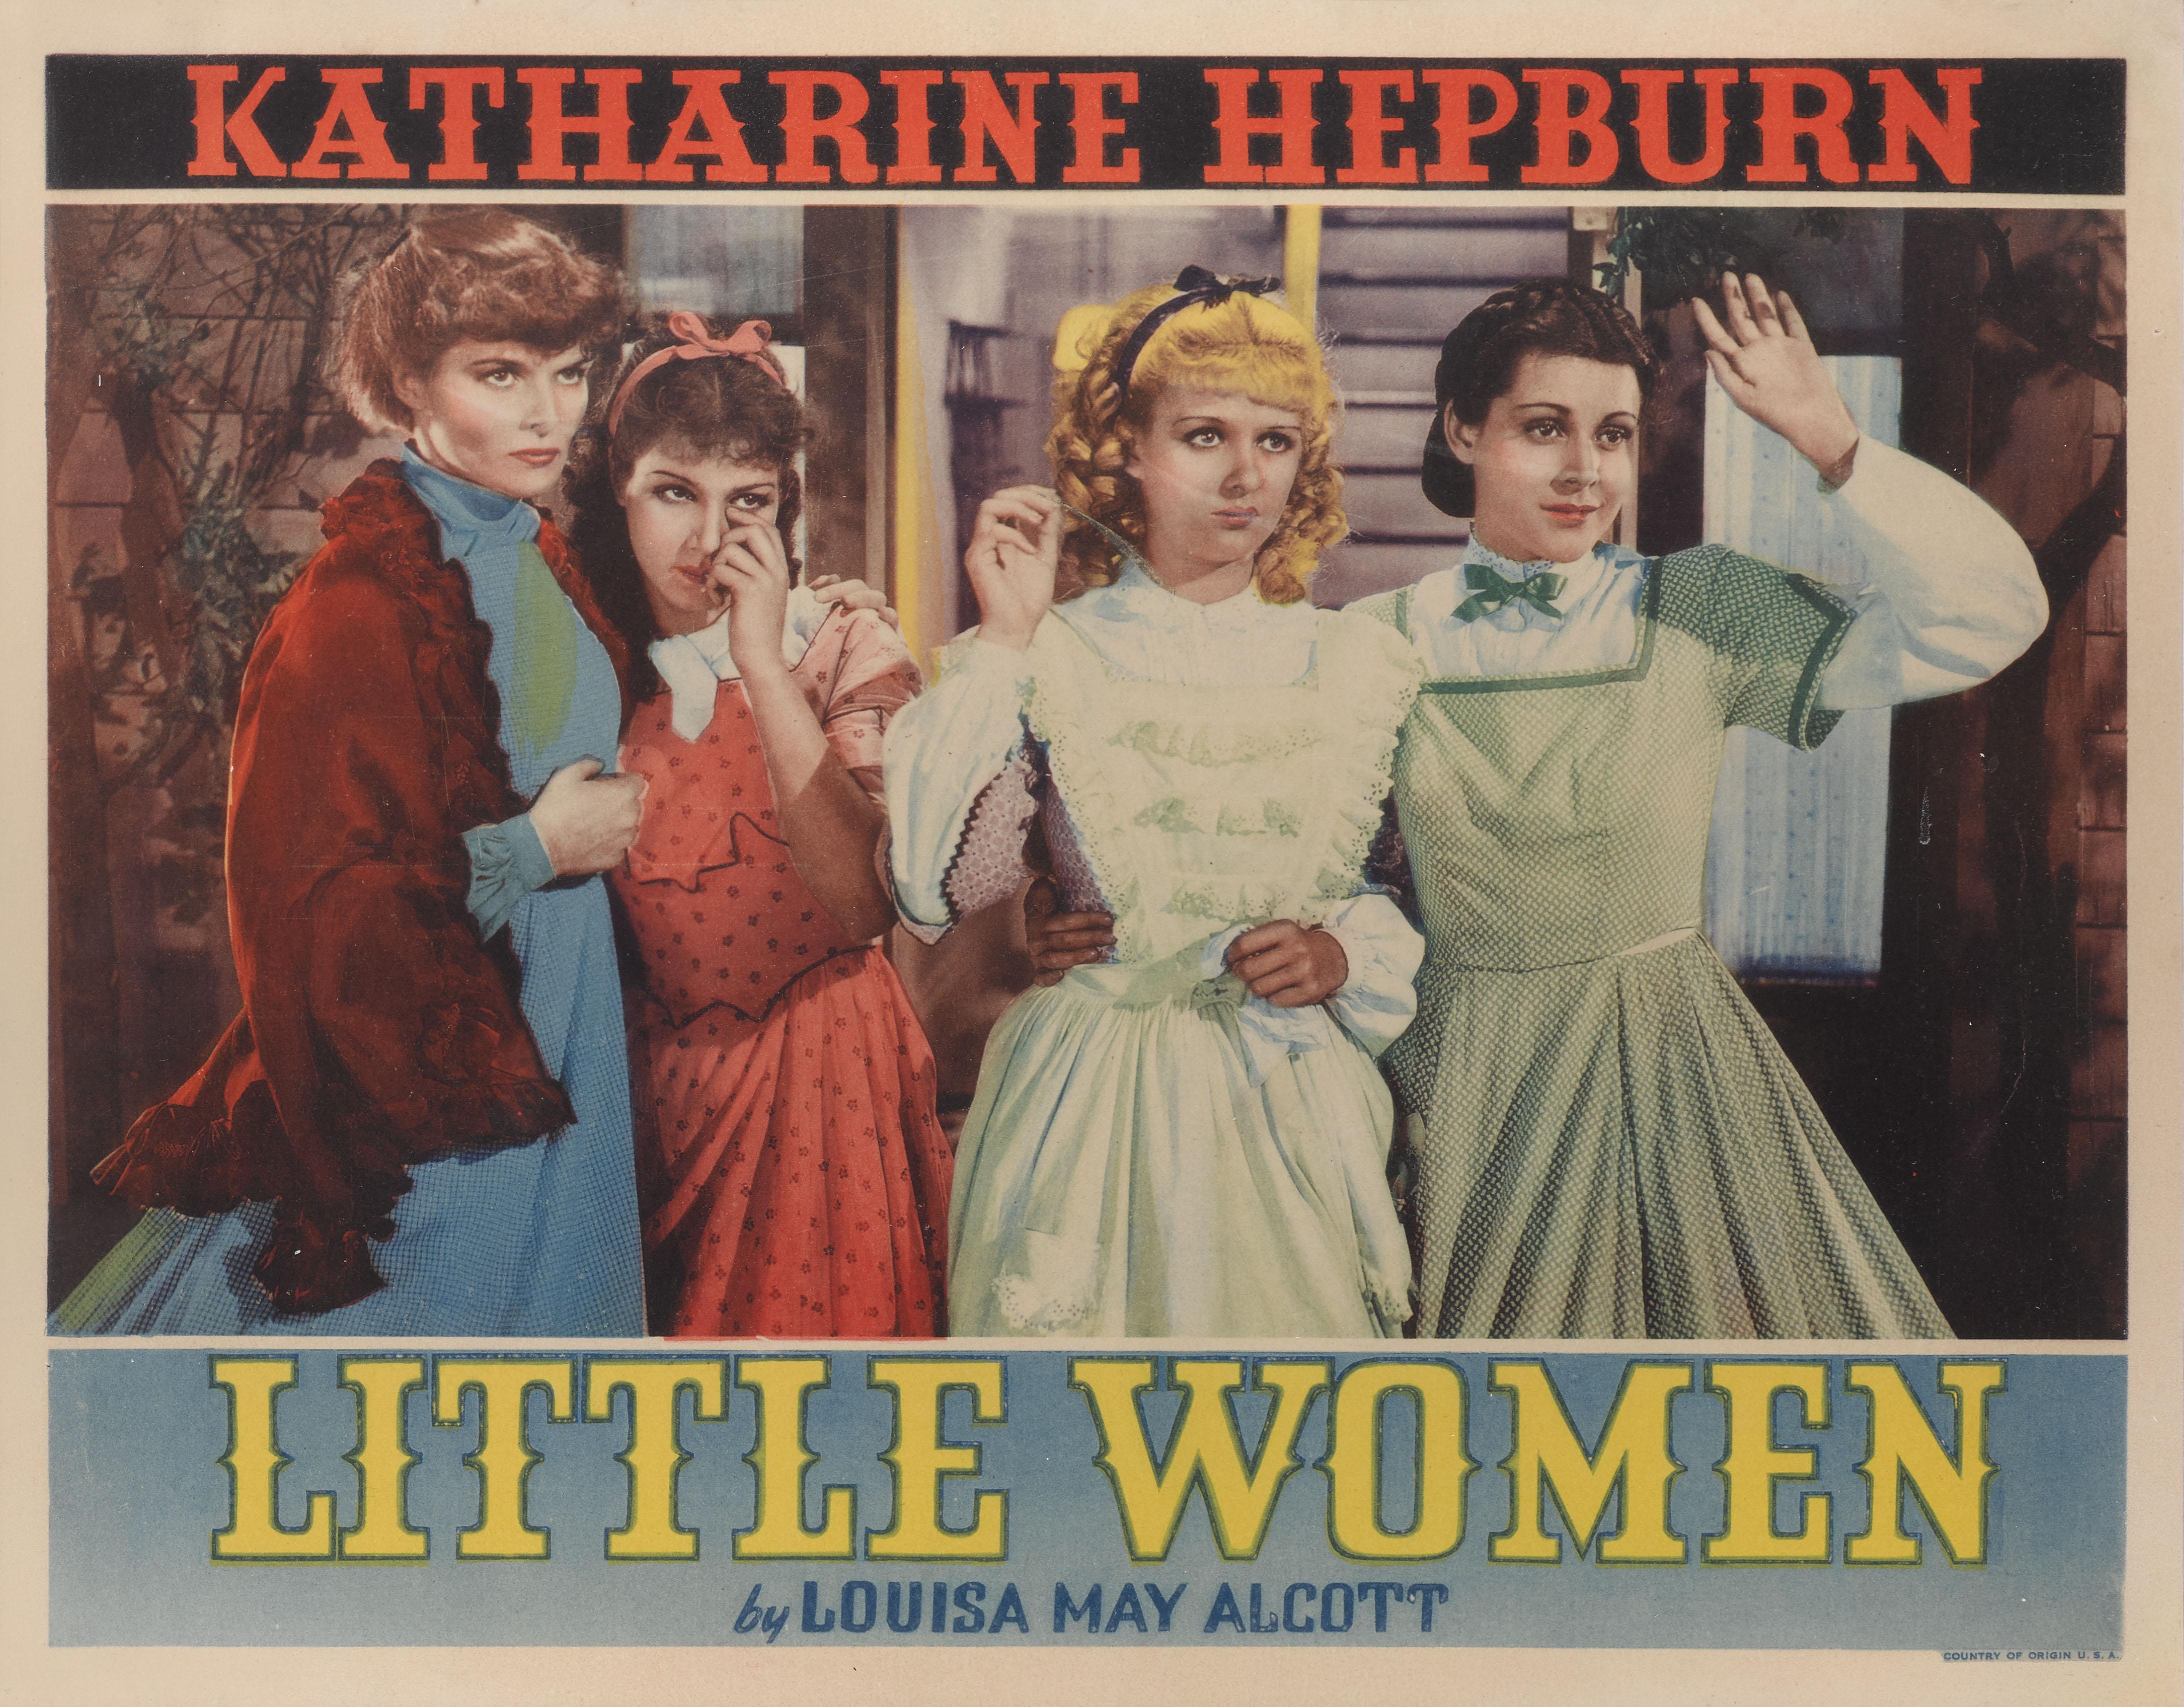 Original US lobby card for the 1933 drama romance Little Women.
This film starred Katherine Hepburn, Paul Lukas and Joan Bennett and was directed by George Cukor.
This lobby card is conservation framed with UV plexiglass in an Obeche wood frame with